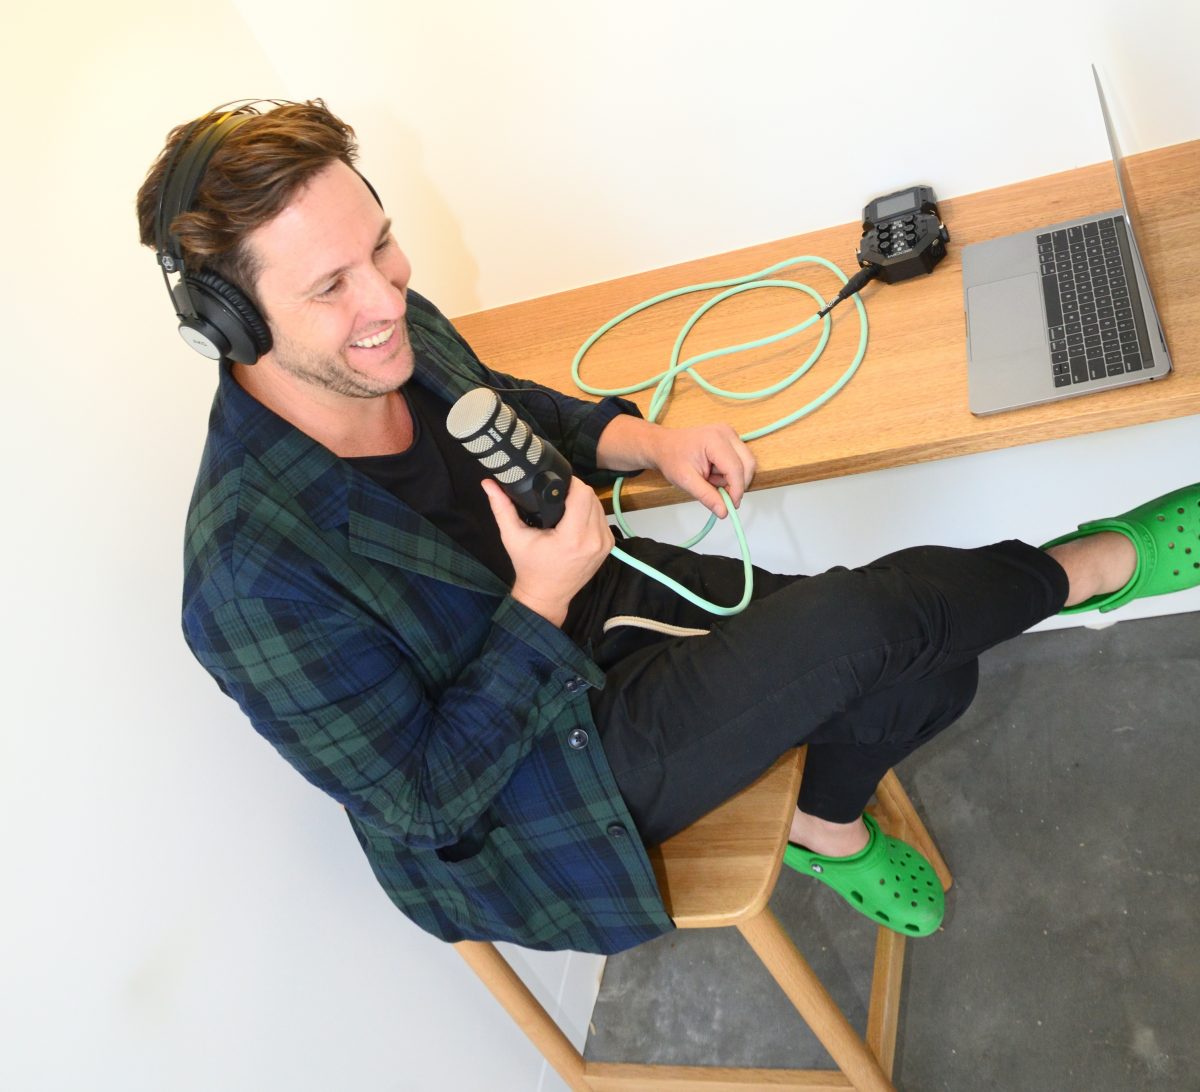 Heath Piper from Playback Interviews sitting at a desk with a microphone and a laptop